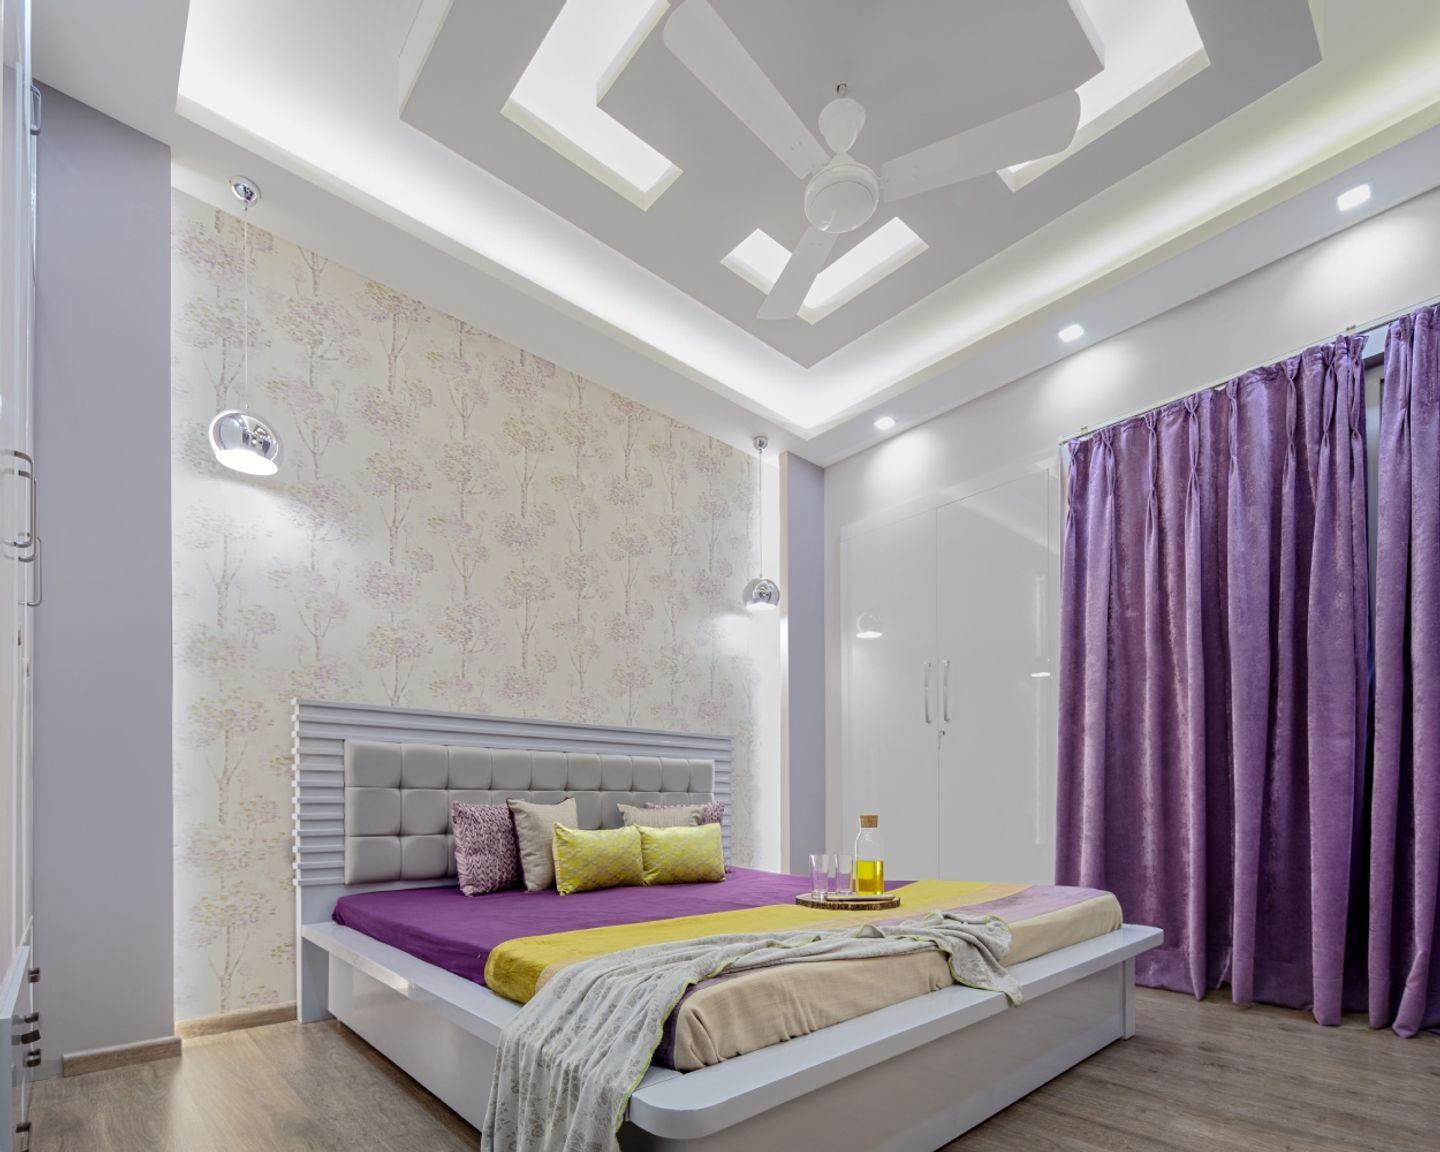 White POP Ceiling With Recessed And Drop Lights - Livspace